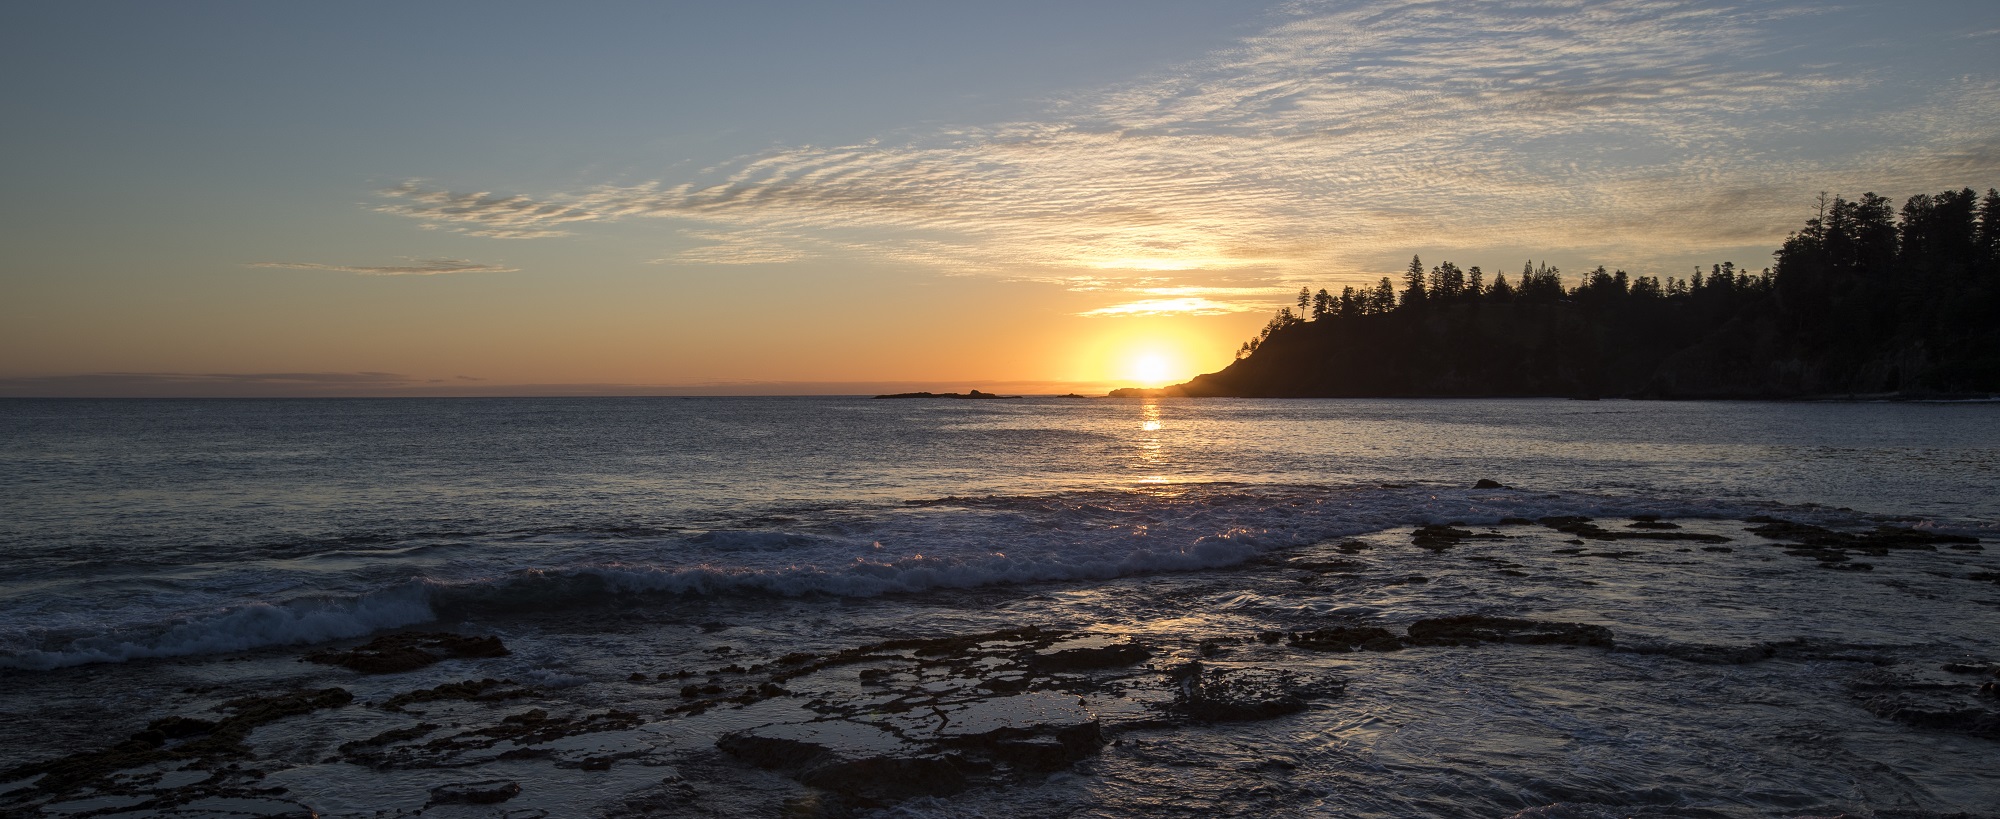 10 Free Things To Do On Norfolk Island